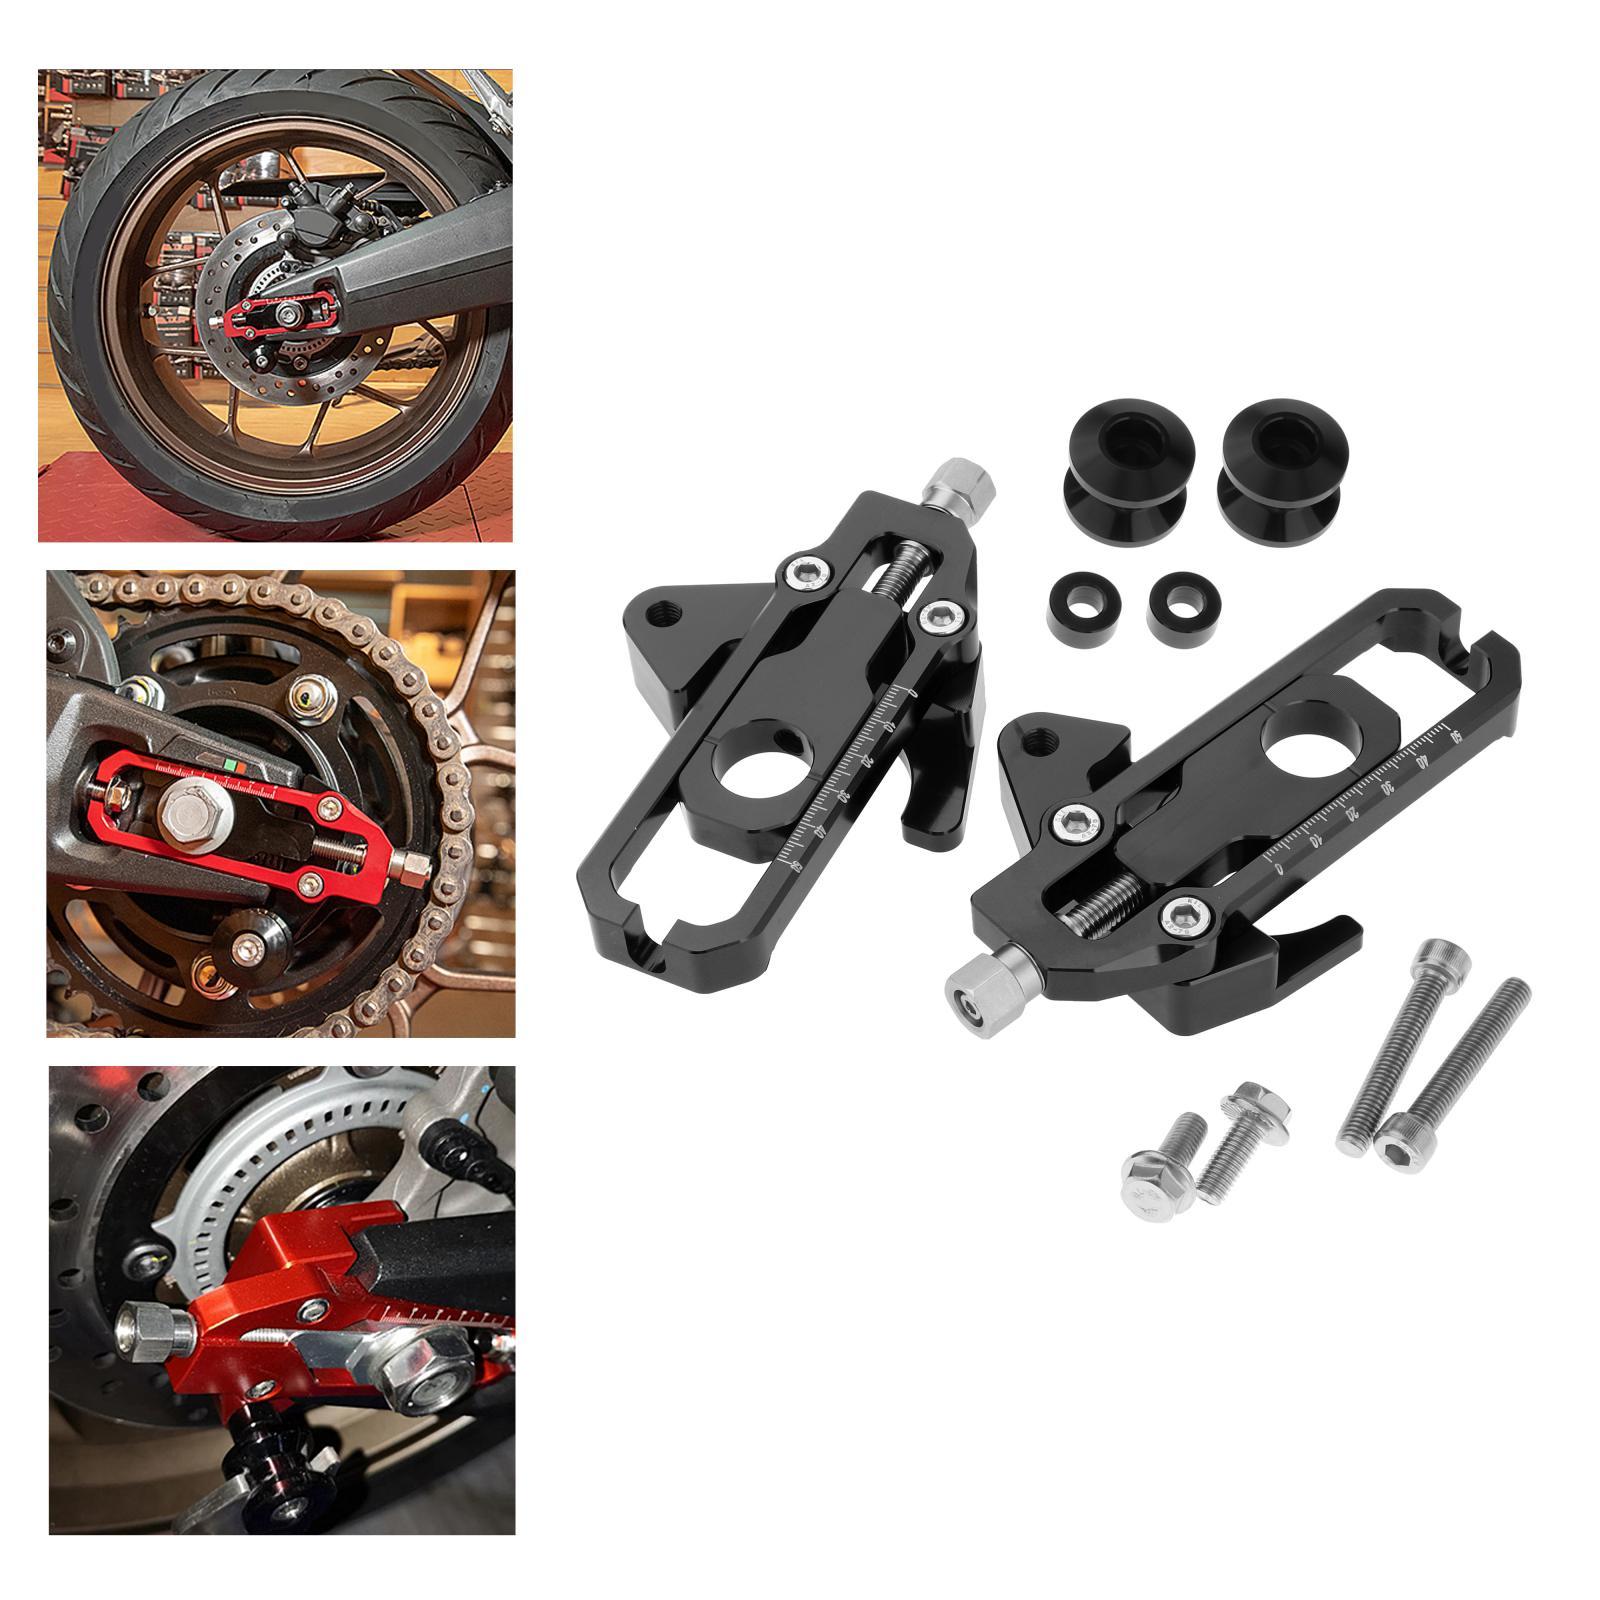 Motorcycle Chain Adjusters Tensioners for Honda CB650R CBR650R 2019 2020, Professional Accessories